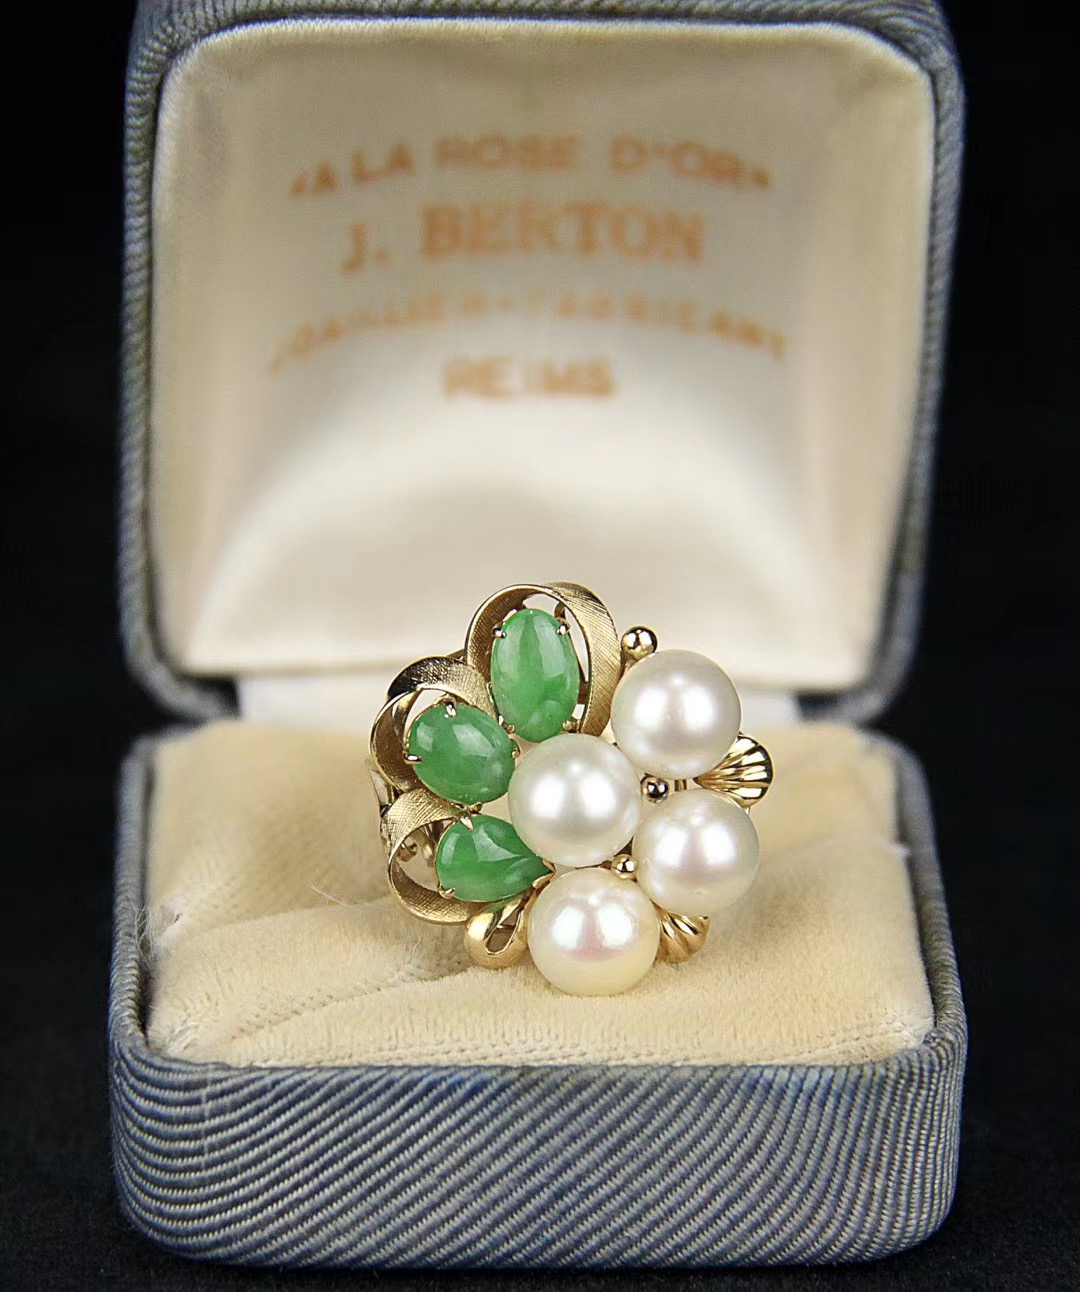 Jadeite and Pearl Ring - Image 6 of 6